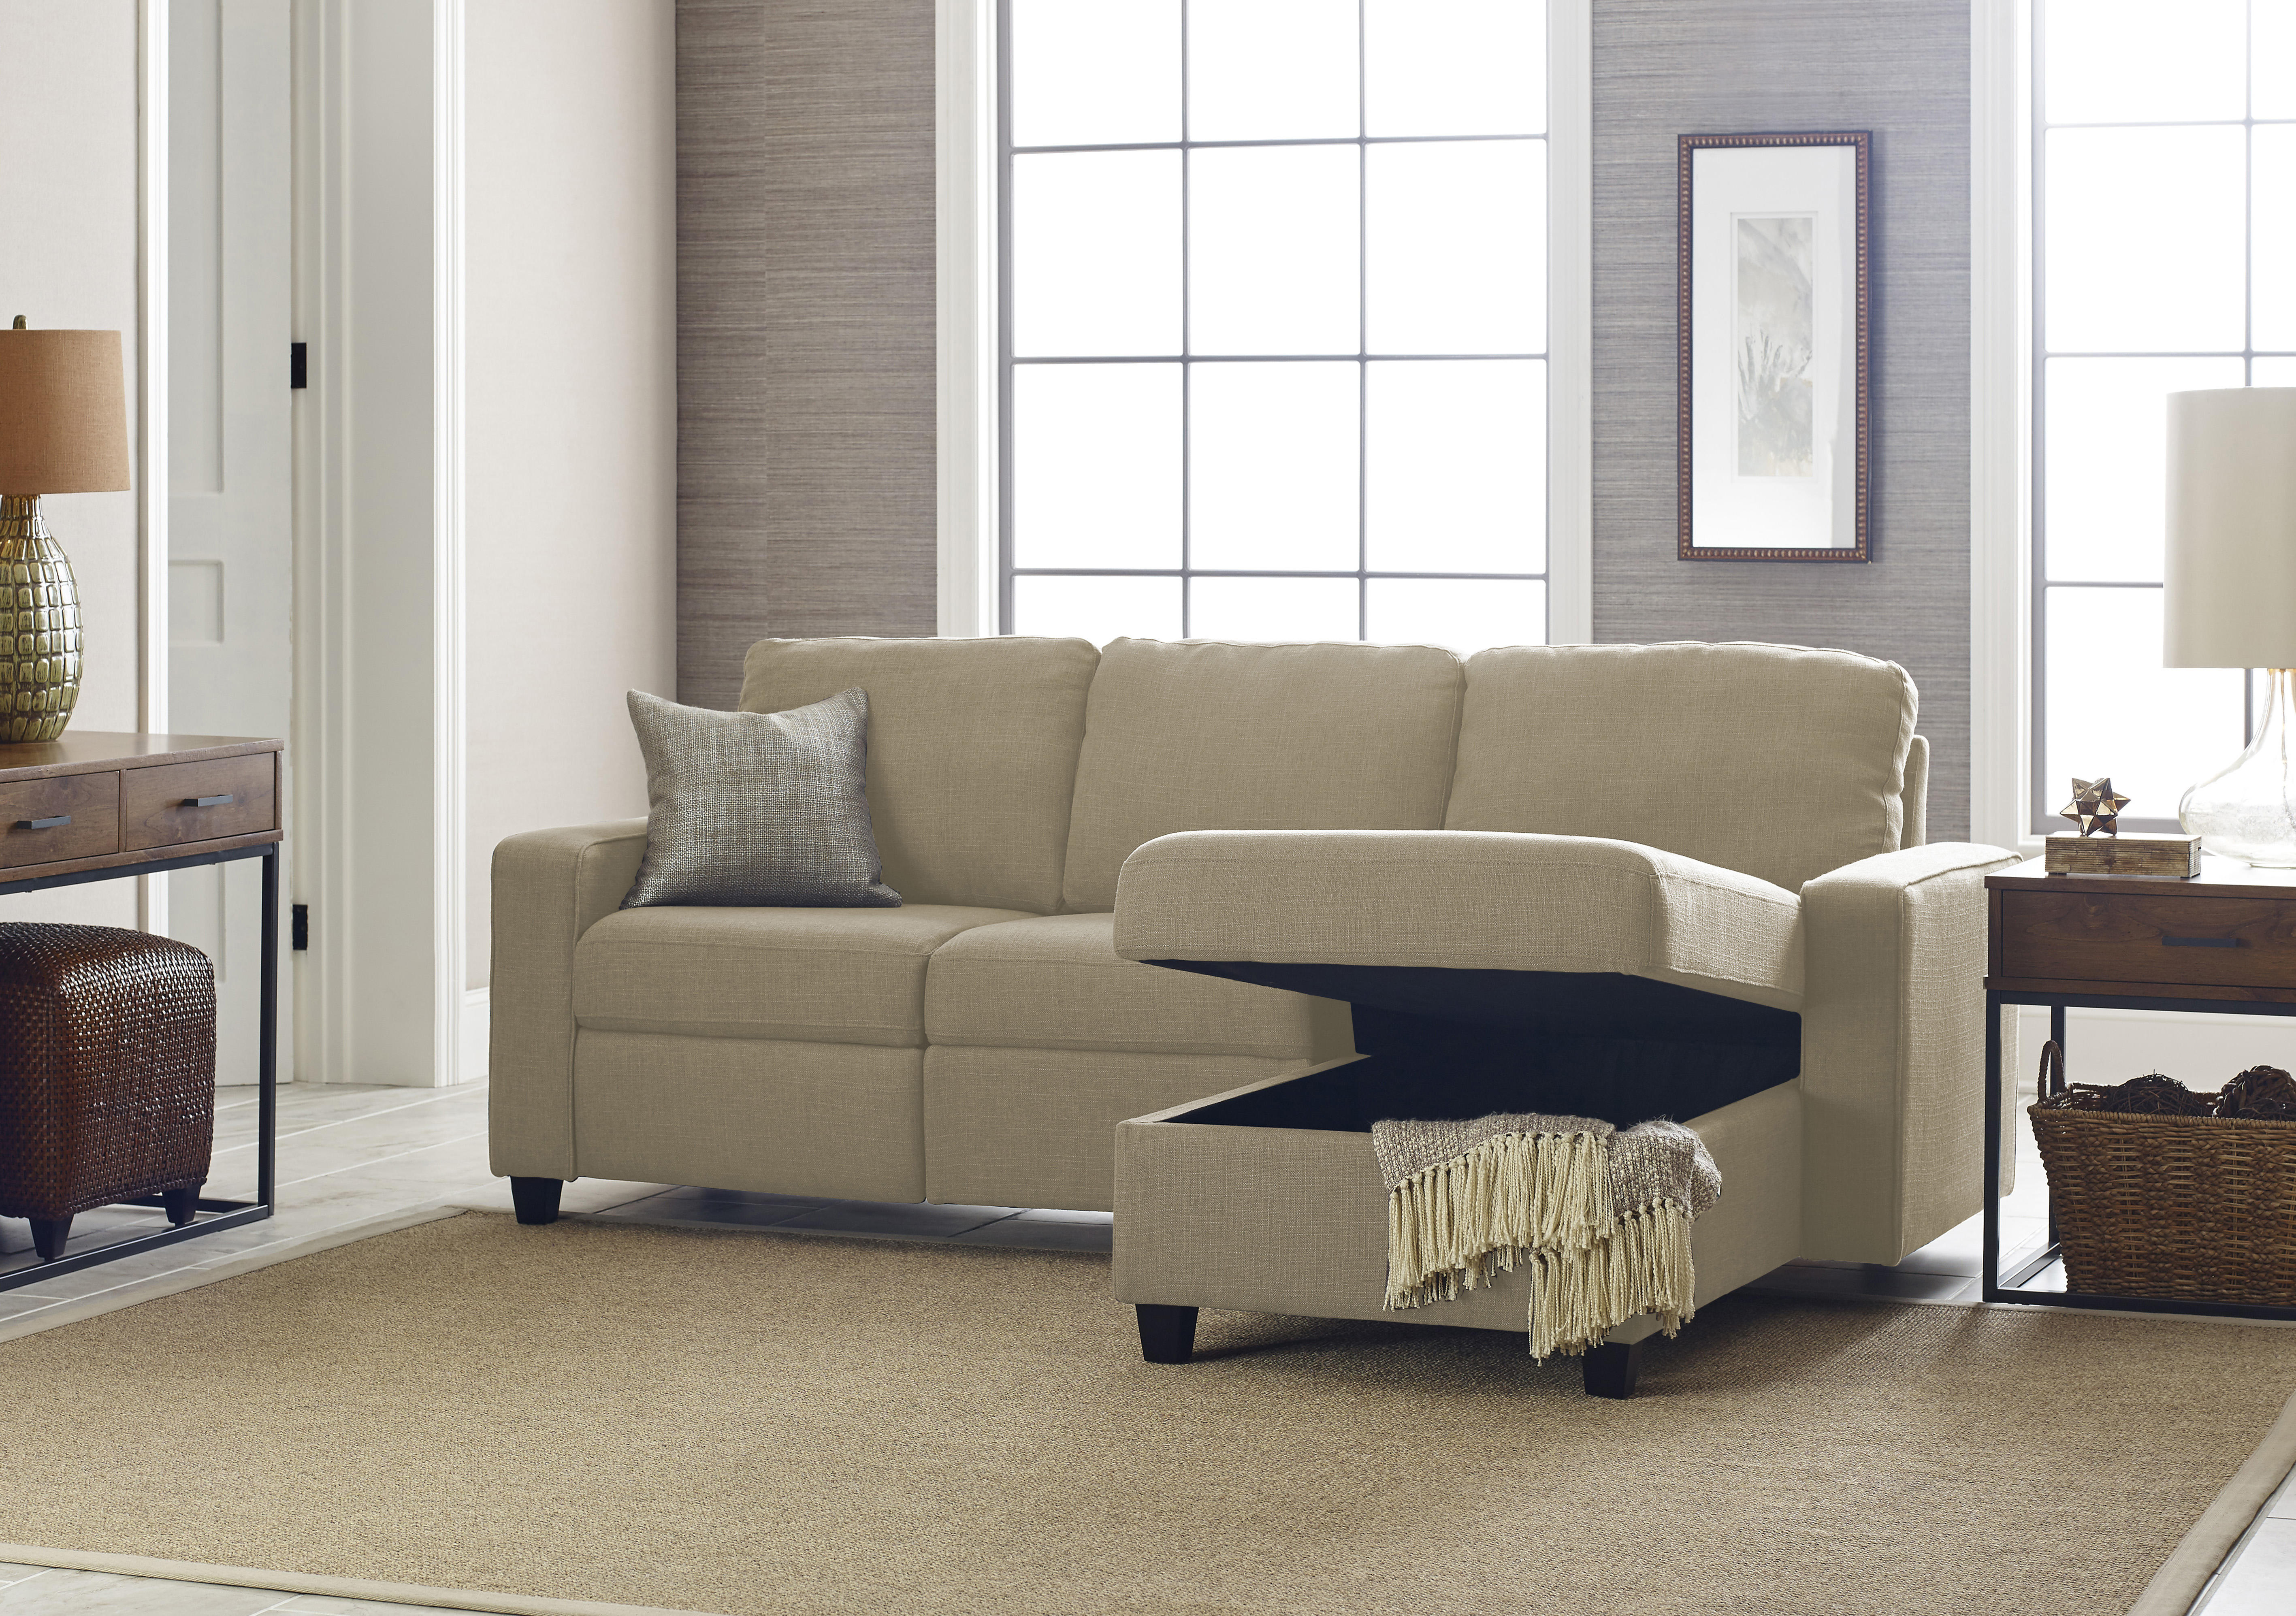 Serta Palisades Reclining Sectional with Right Storage Chaise - Oatmeal - image 2 of 9